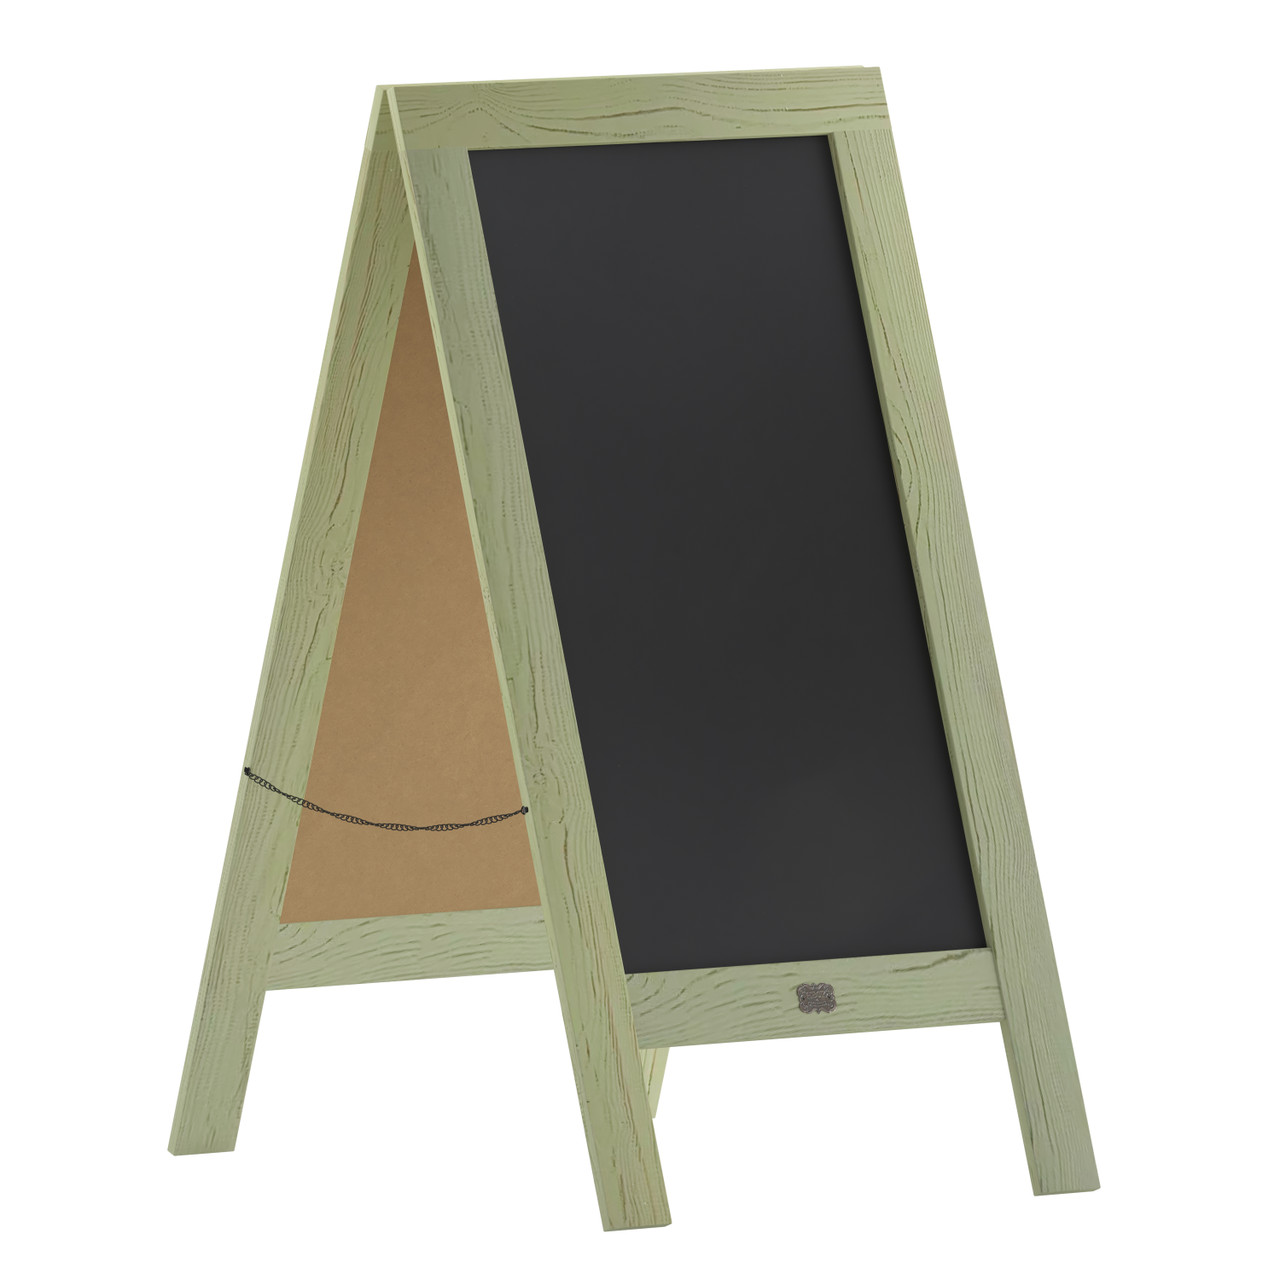 Flash Furniture Canterbury 40" x 20" Vintage Wooden A-Frame Magnetic Indoor/Outdoor Chalkboard Sign, Freestanding Double Sided Extra Large